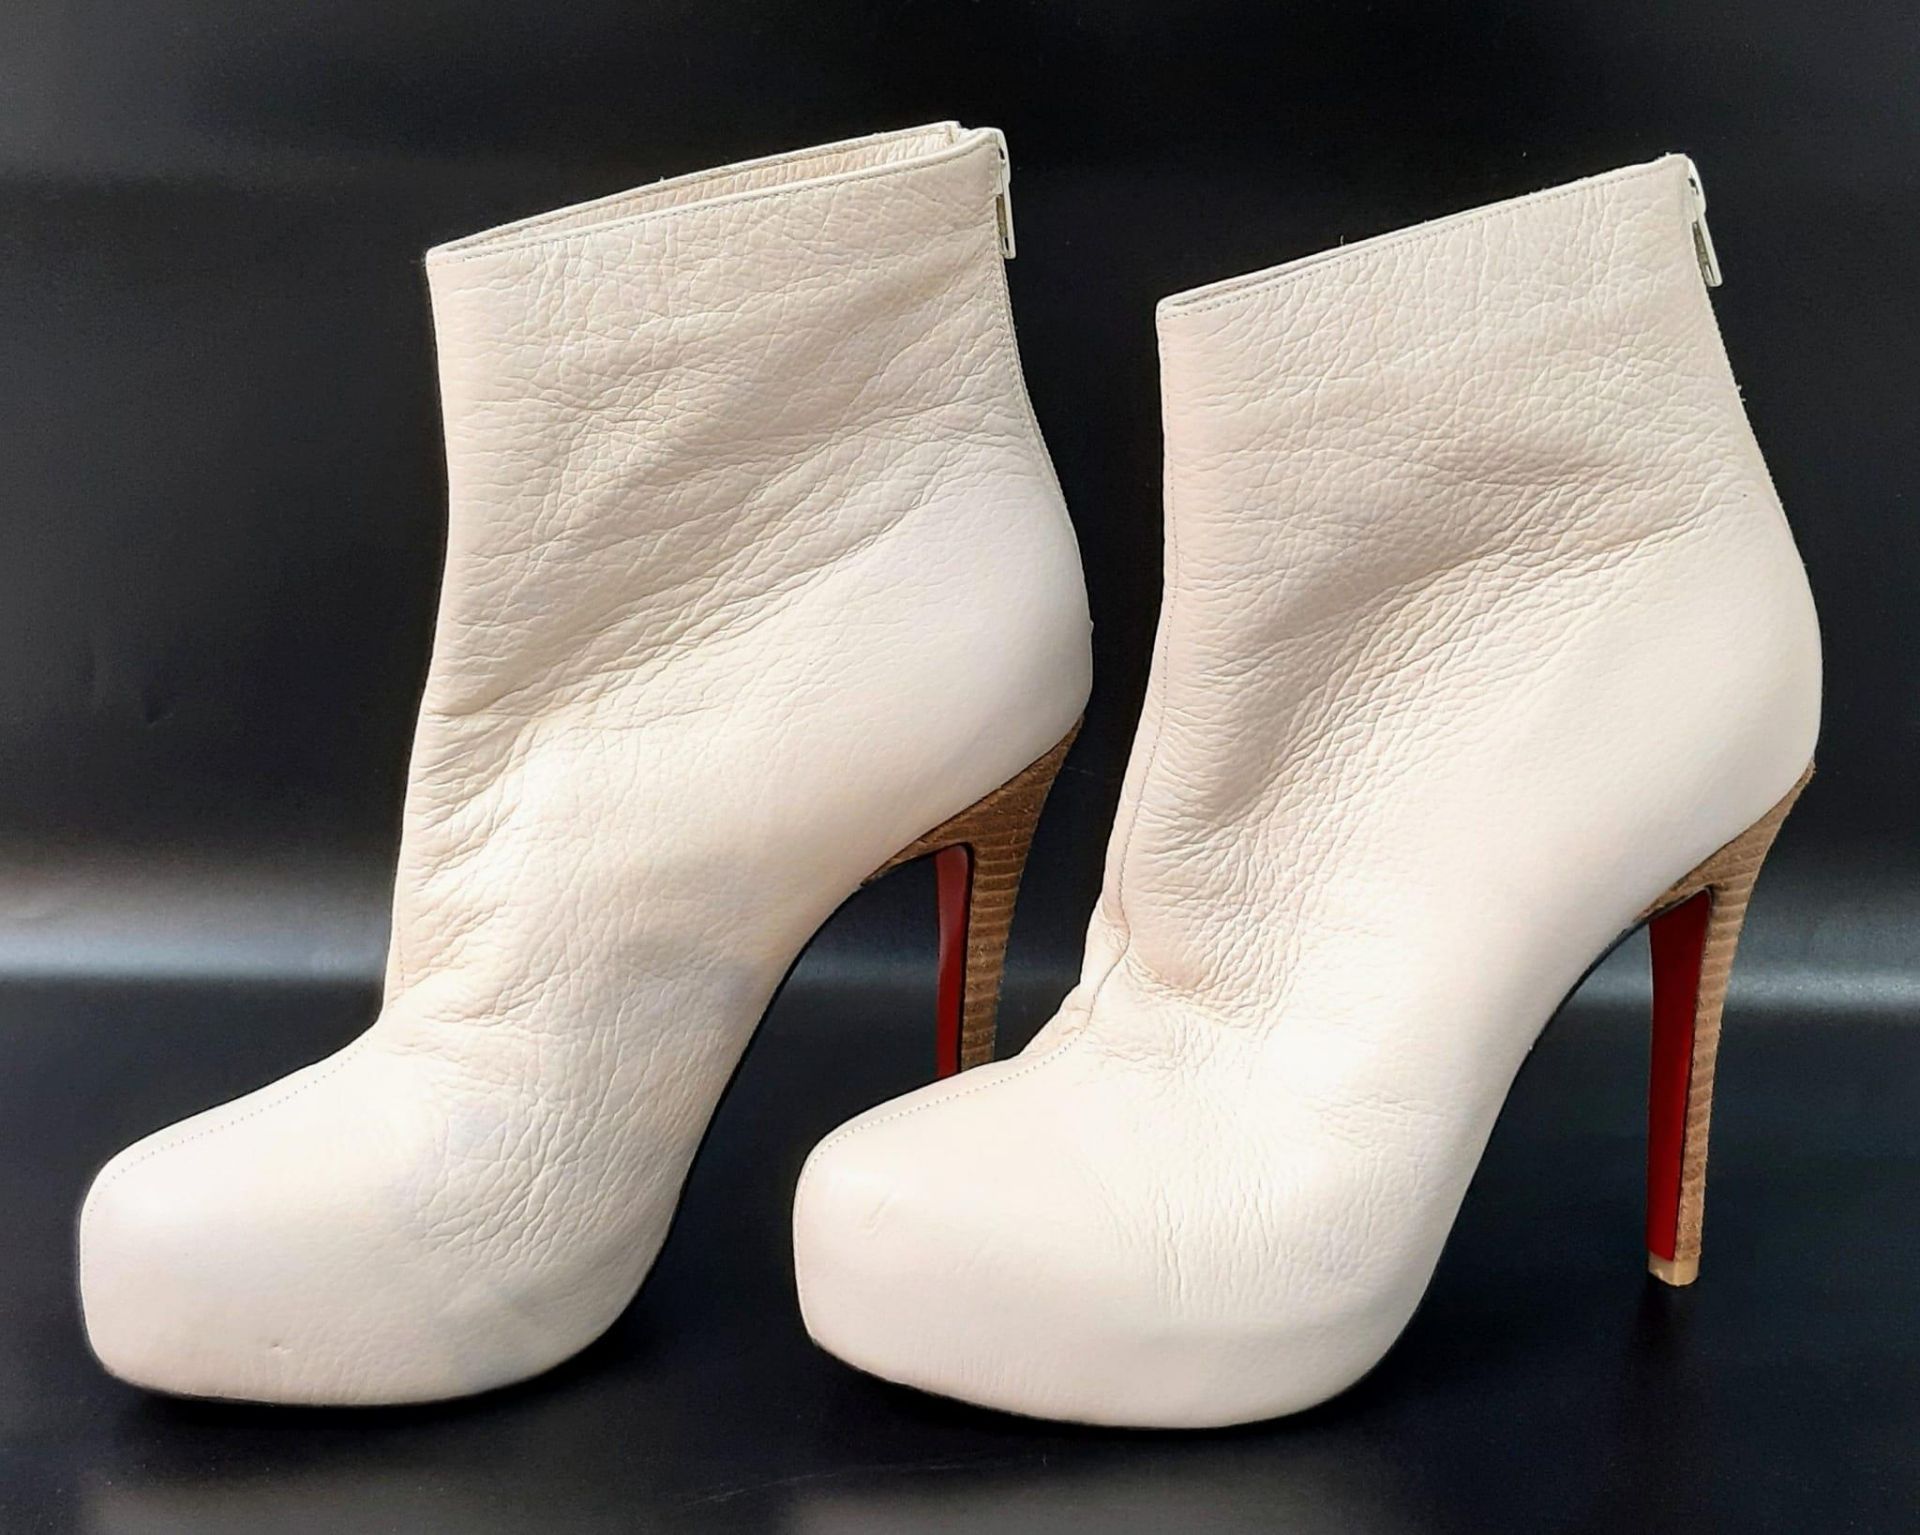 A Pair of Preloved Christian Louboutin Platform Ankle Boots, White leather with Wooden Heel, UK